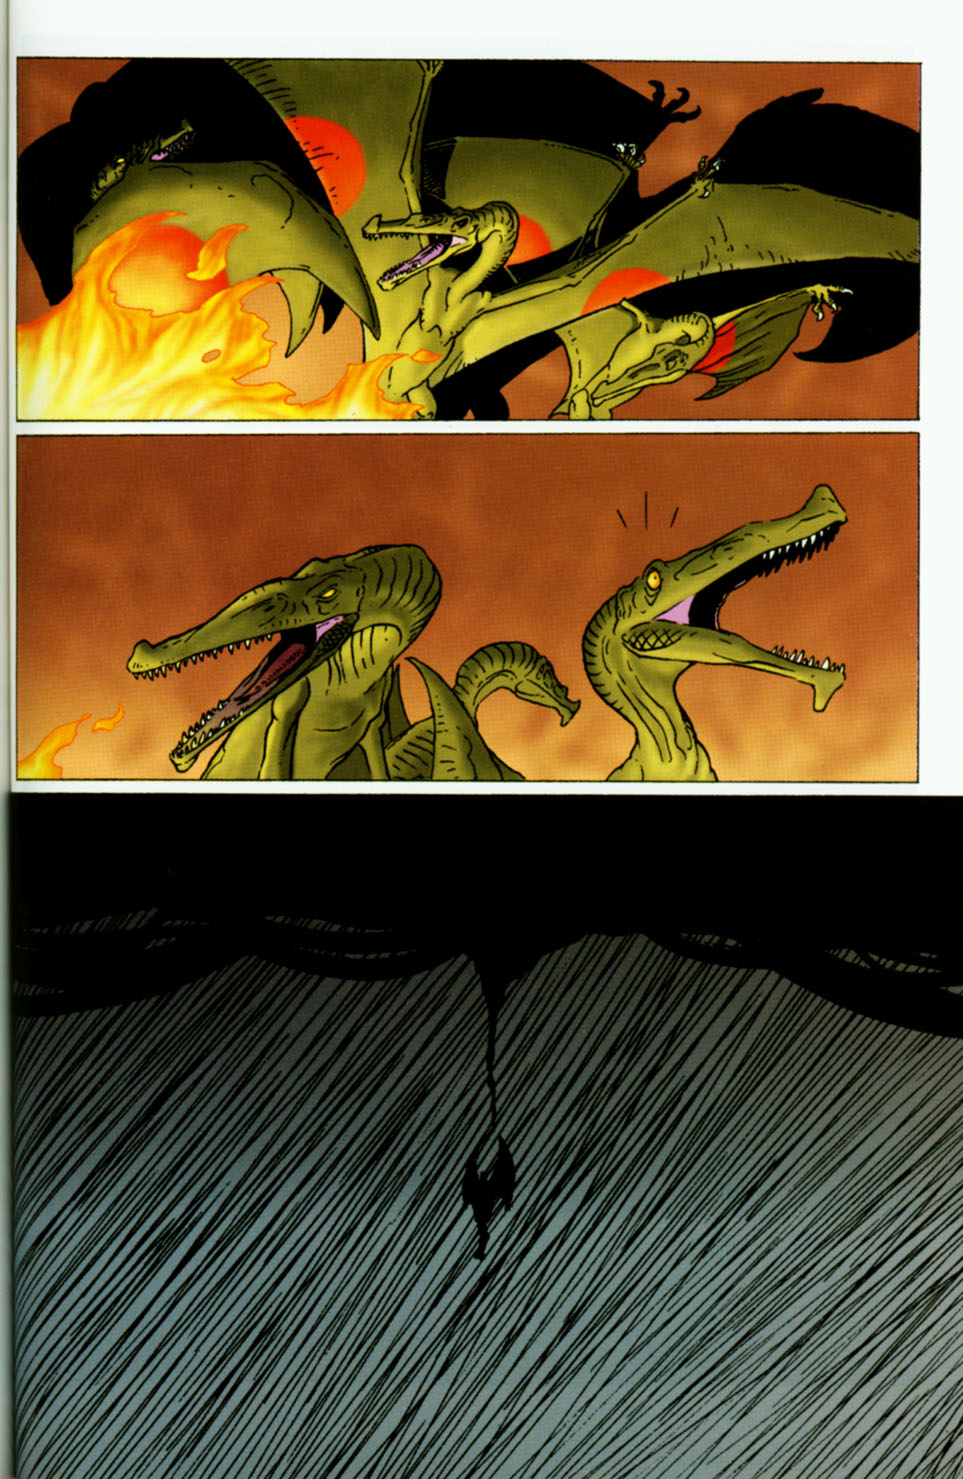 Read online Age of Reptiles: The Hunt comic -  Issue #3 - 19